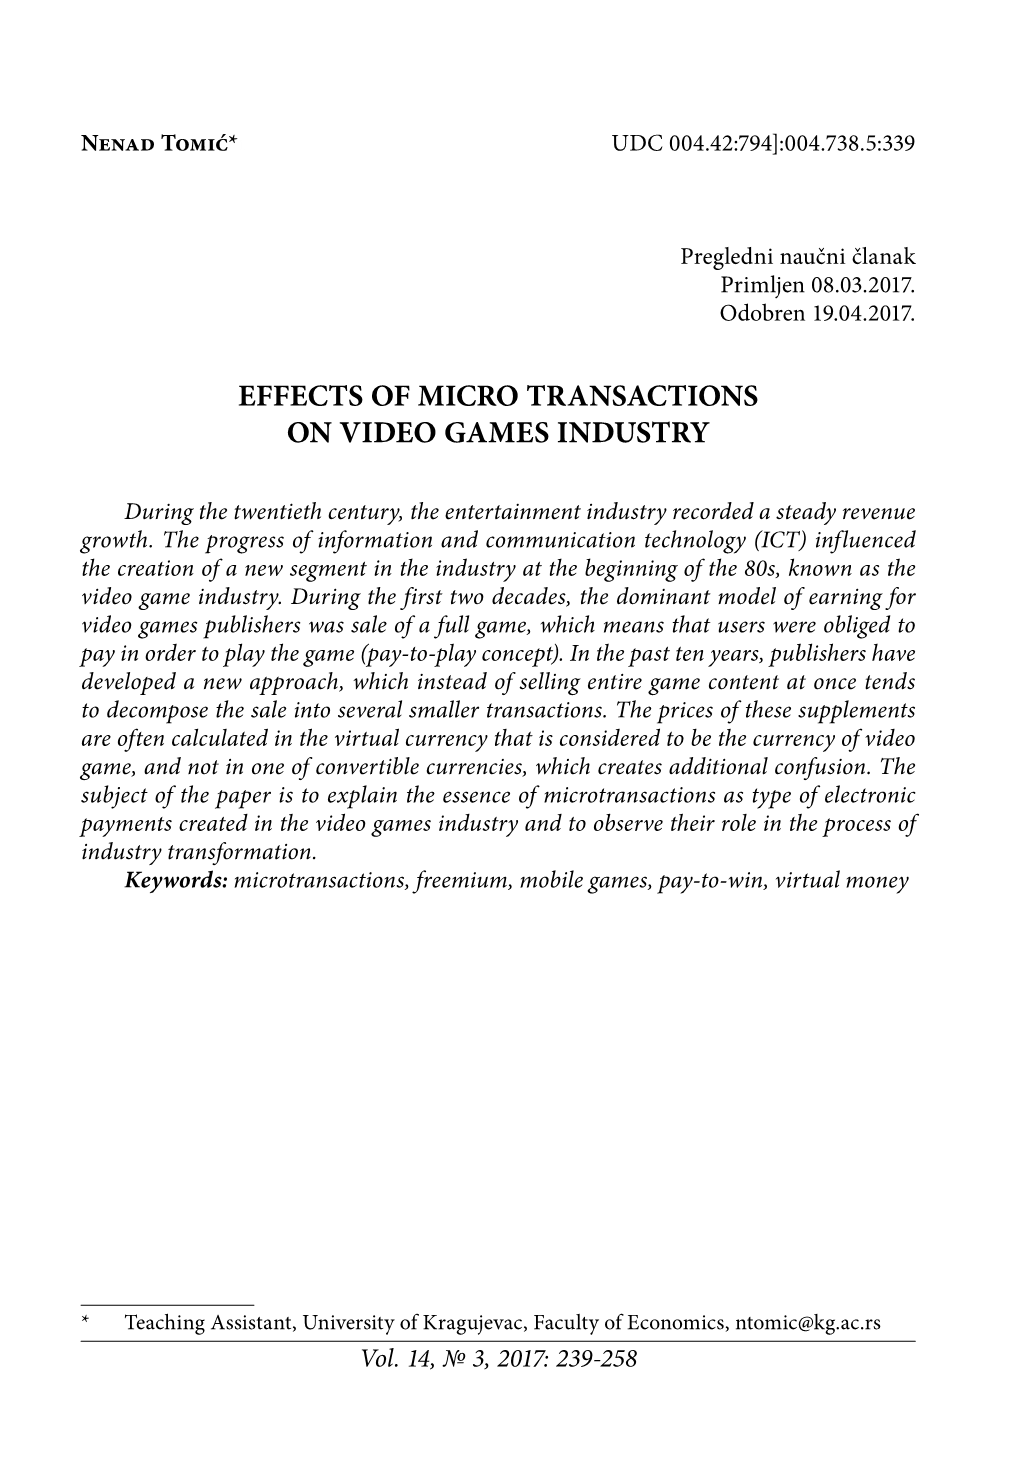 Effects of Micro Transactions on Video Games Industry